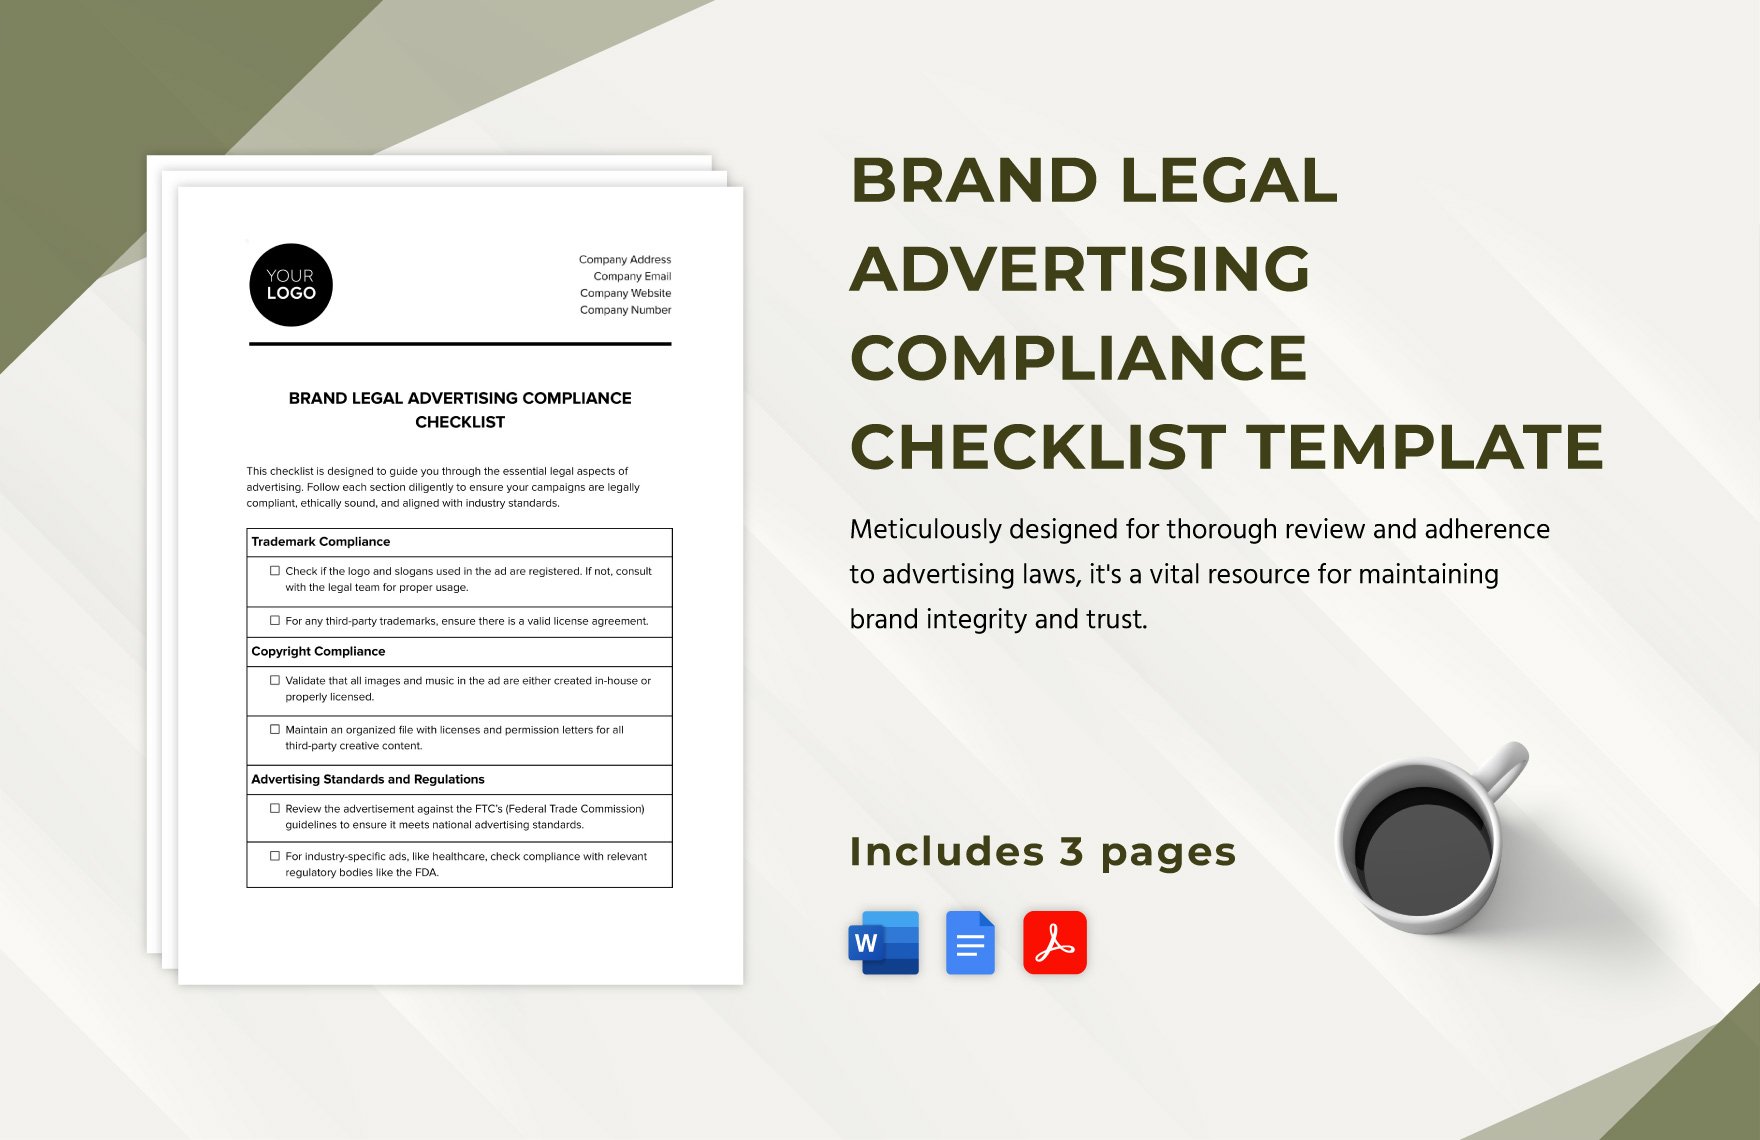 Brand Legal Advertising Compliance Checklist Template in Word, Google Docs, PDF